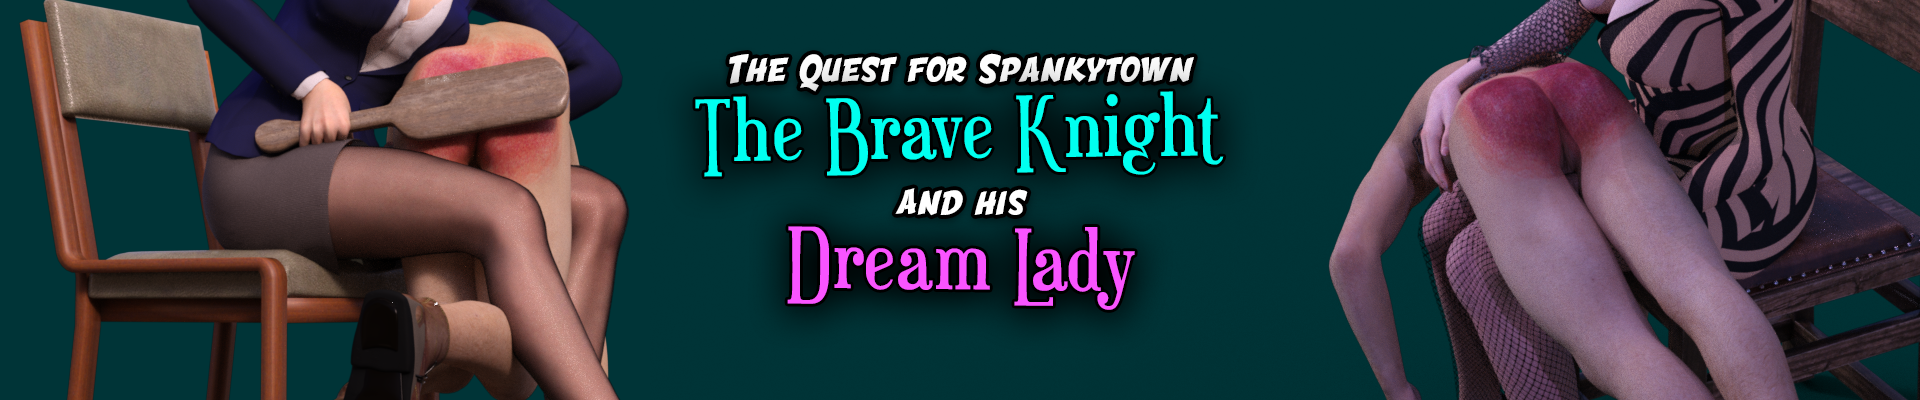 The Brave Knight and his Dream Lady - Part 1